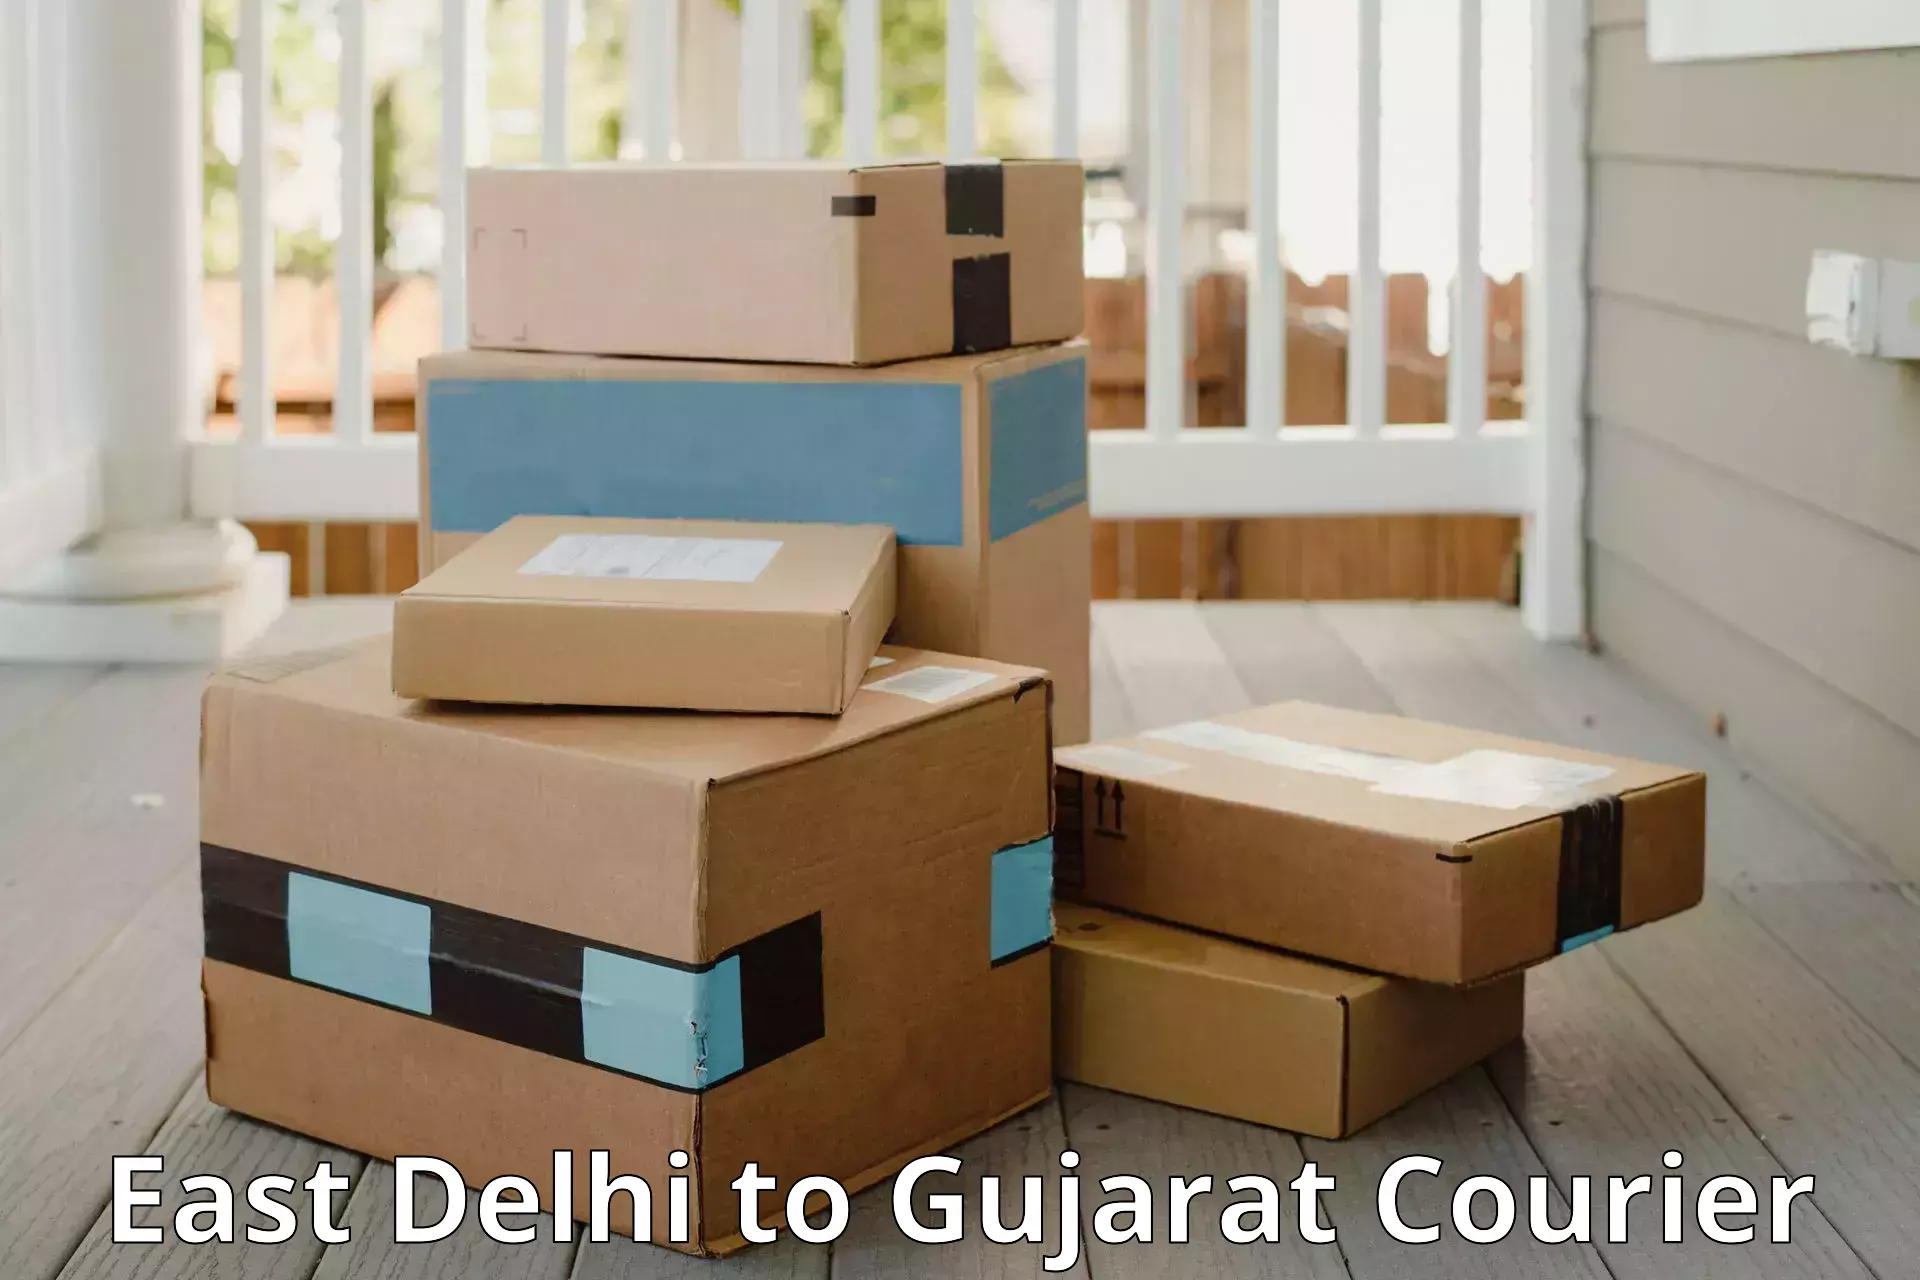 Fast track baggage delivery East Delhi to Gujarat